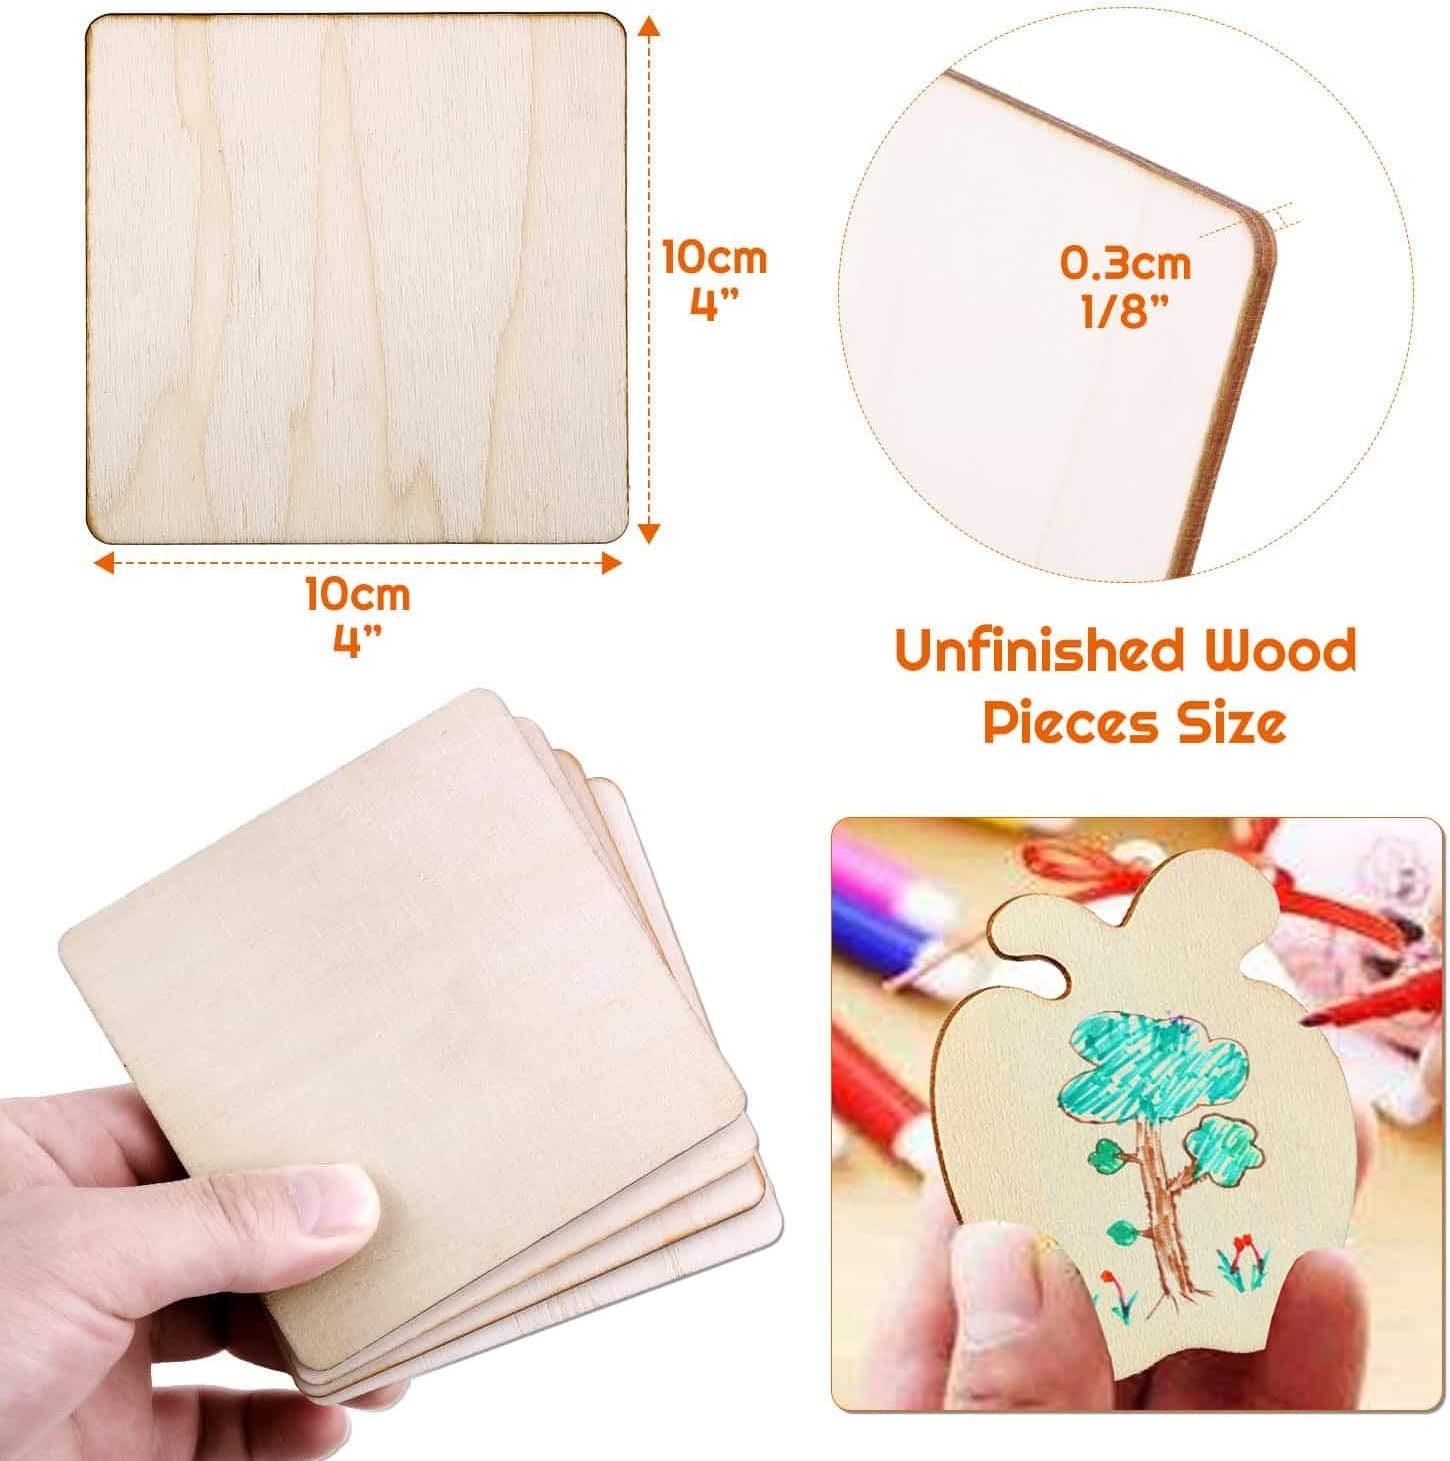 15 Pack Unfinished 4x4 Wood Squares for Crafts, Blank Wooden Tiles